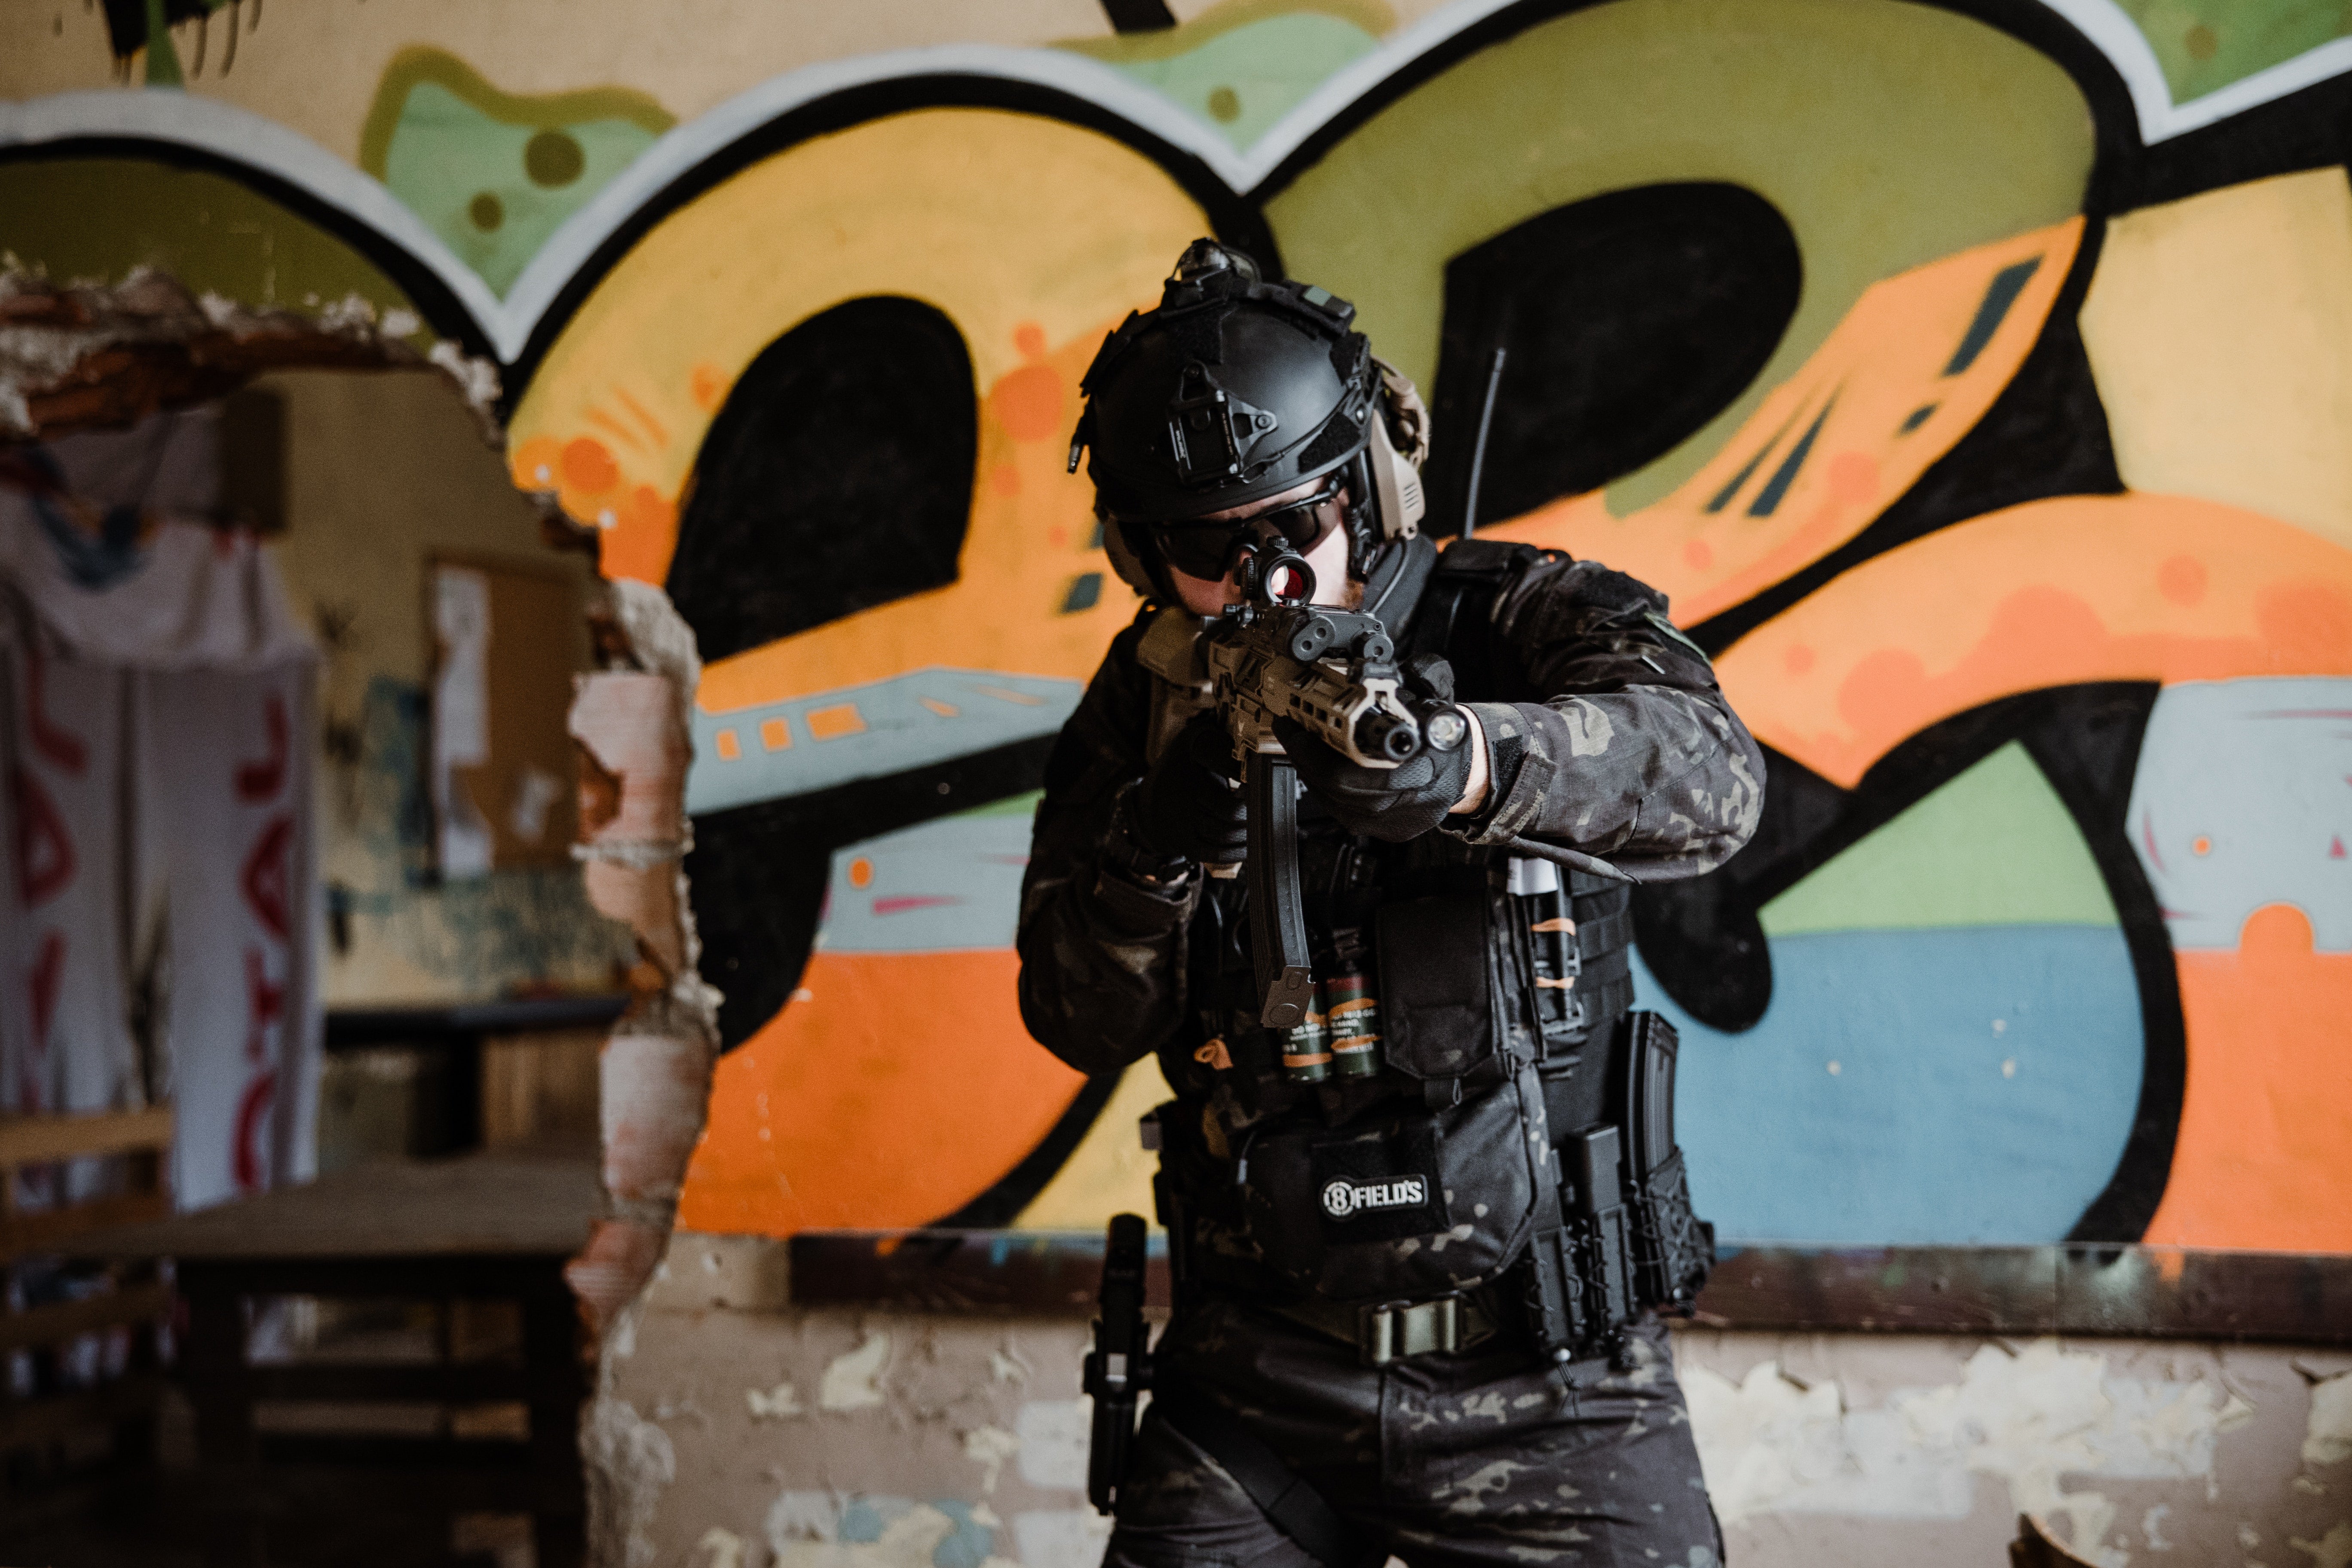 Finding Your Shield: Choosing the Right Tactical Gear for Personal Safety and Self-Defense